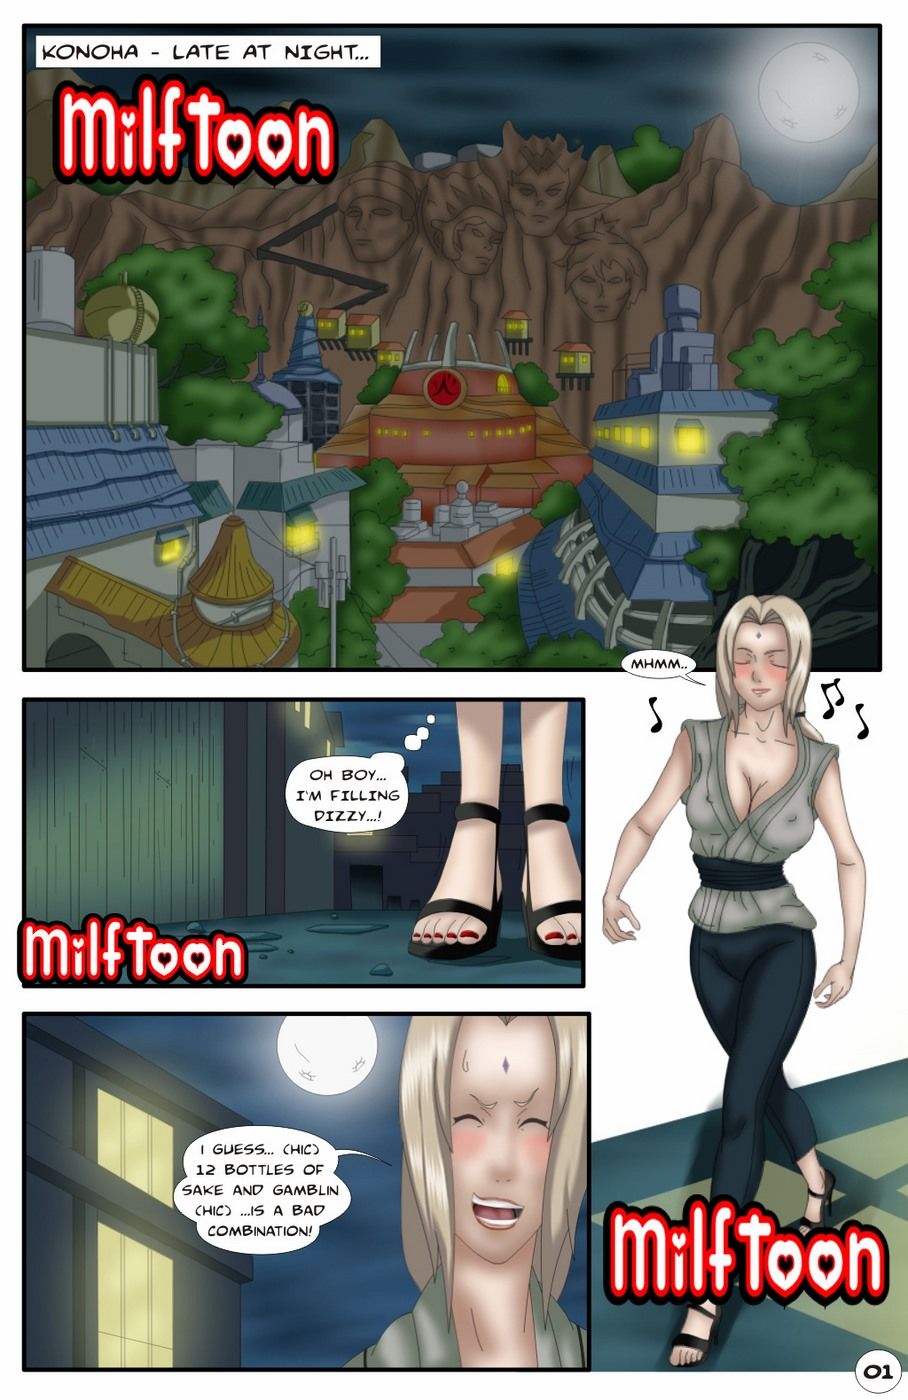 Milftoon- Naruto page 1